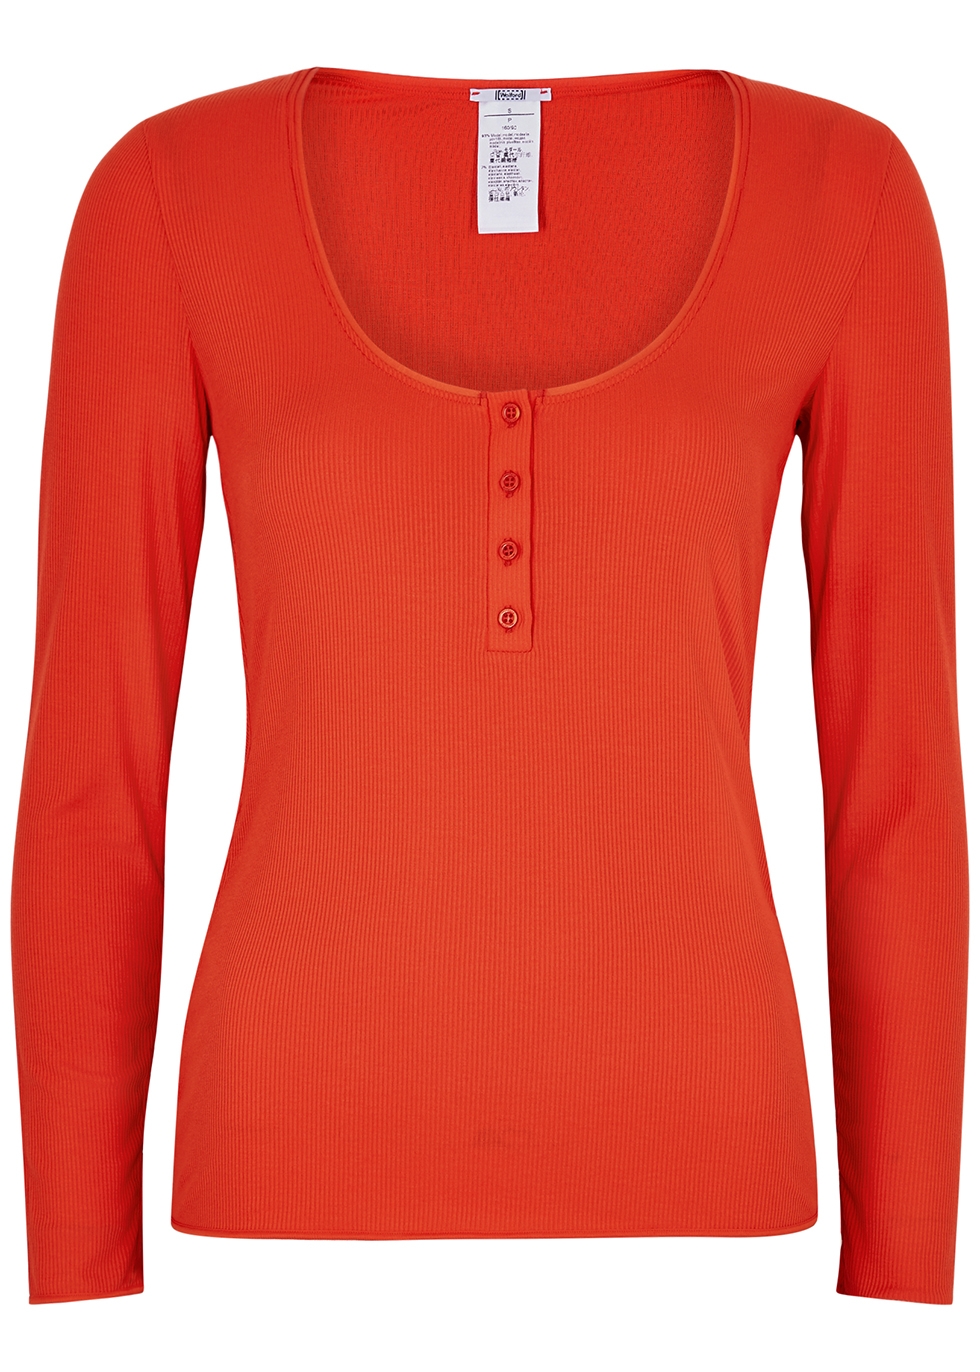 shopwolford in stock - Wolford Henley red ribbed stretch-jersey top of ...